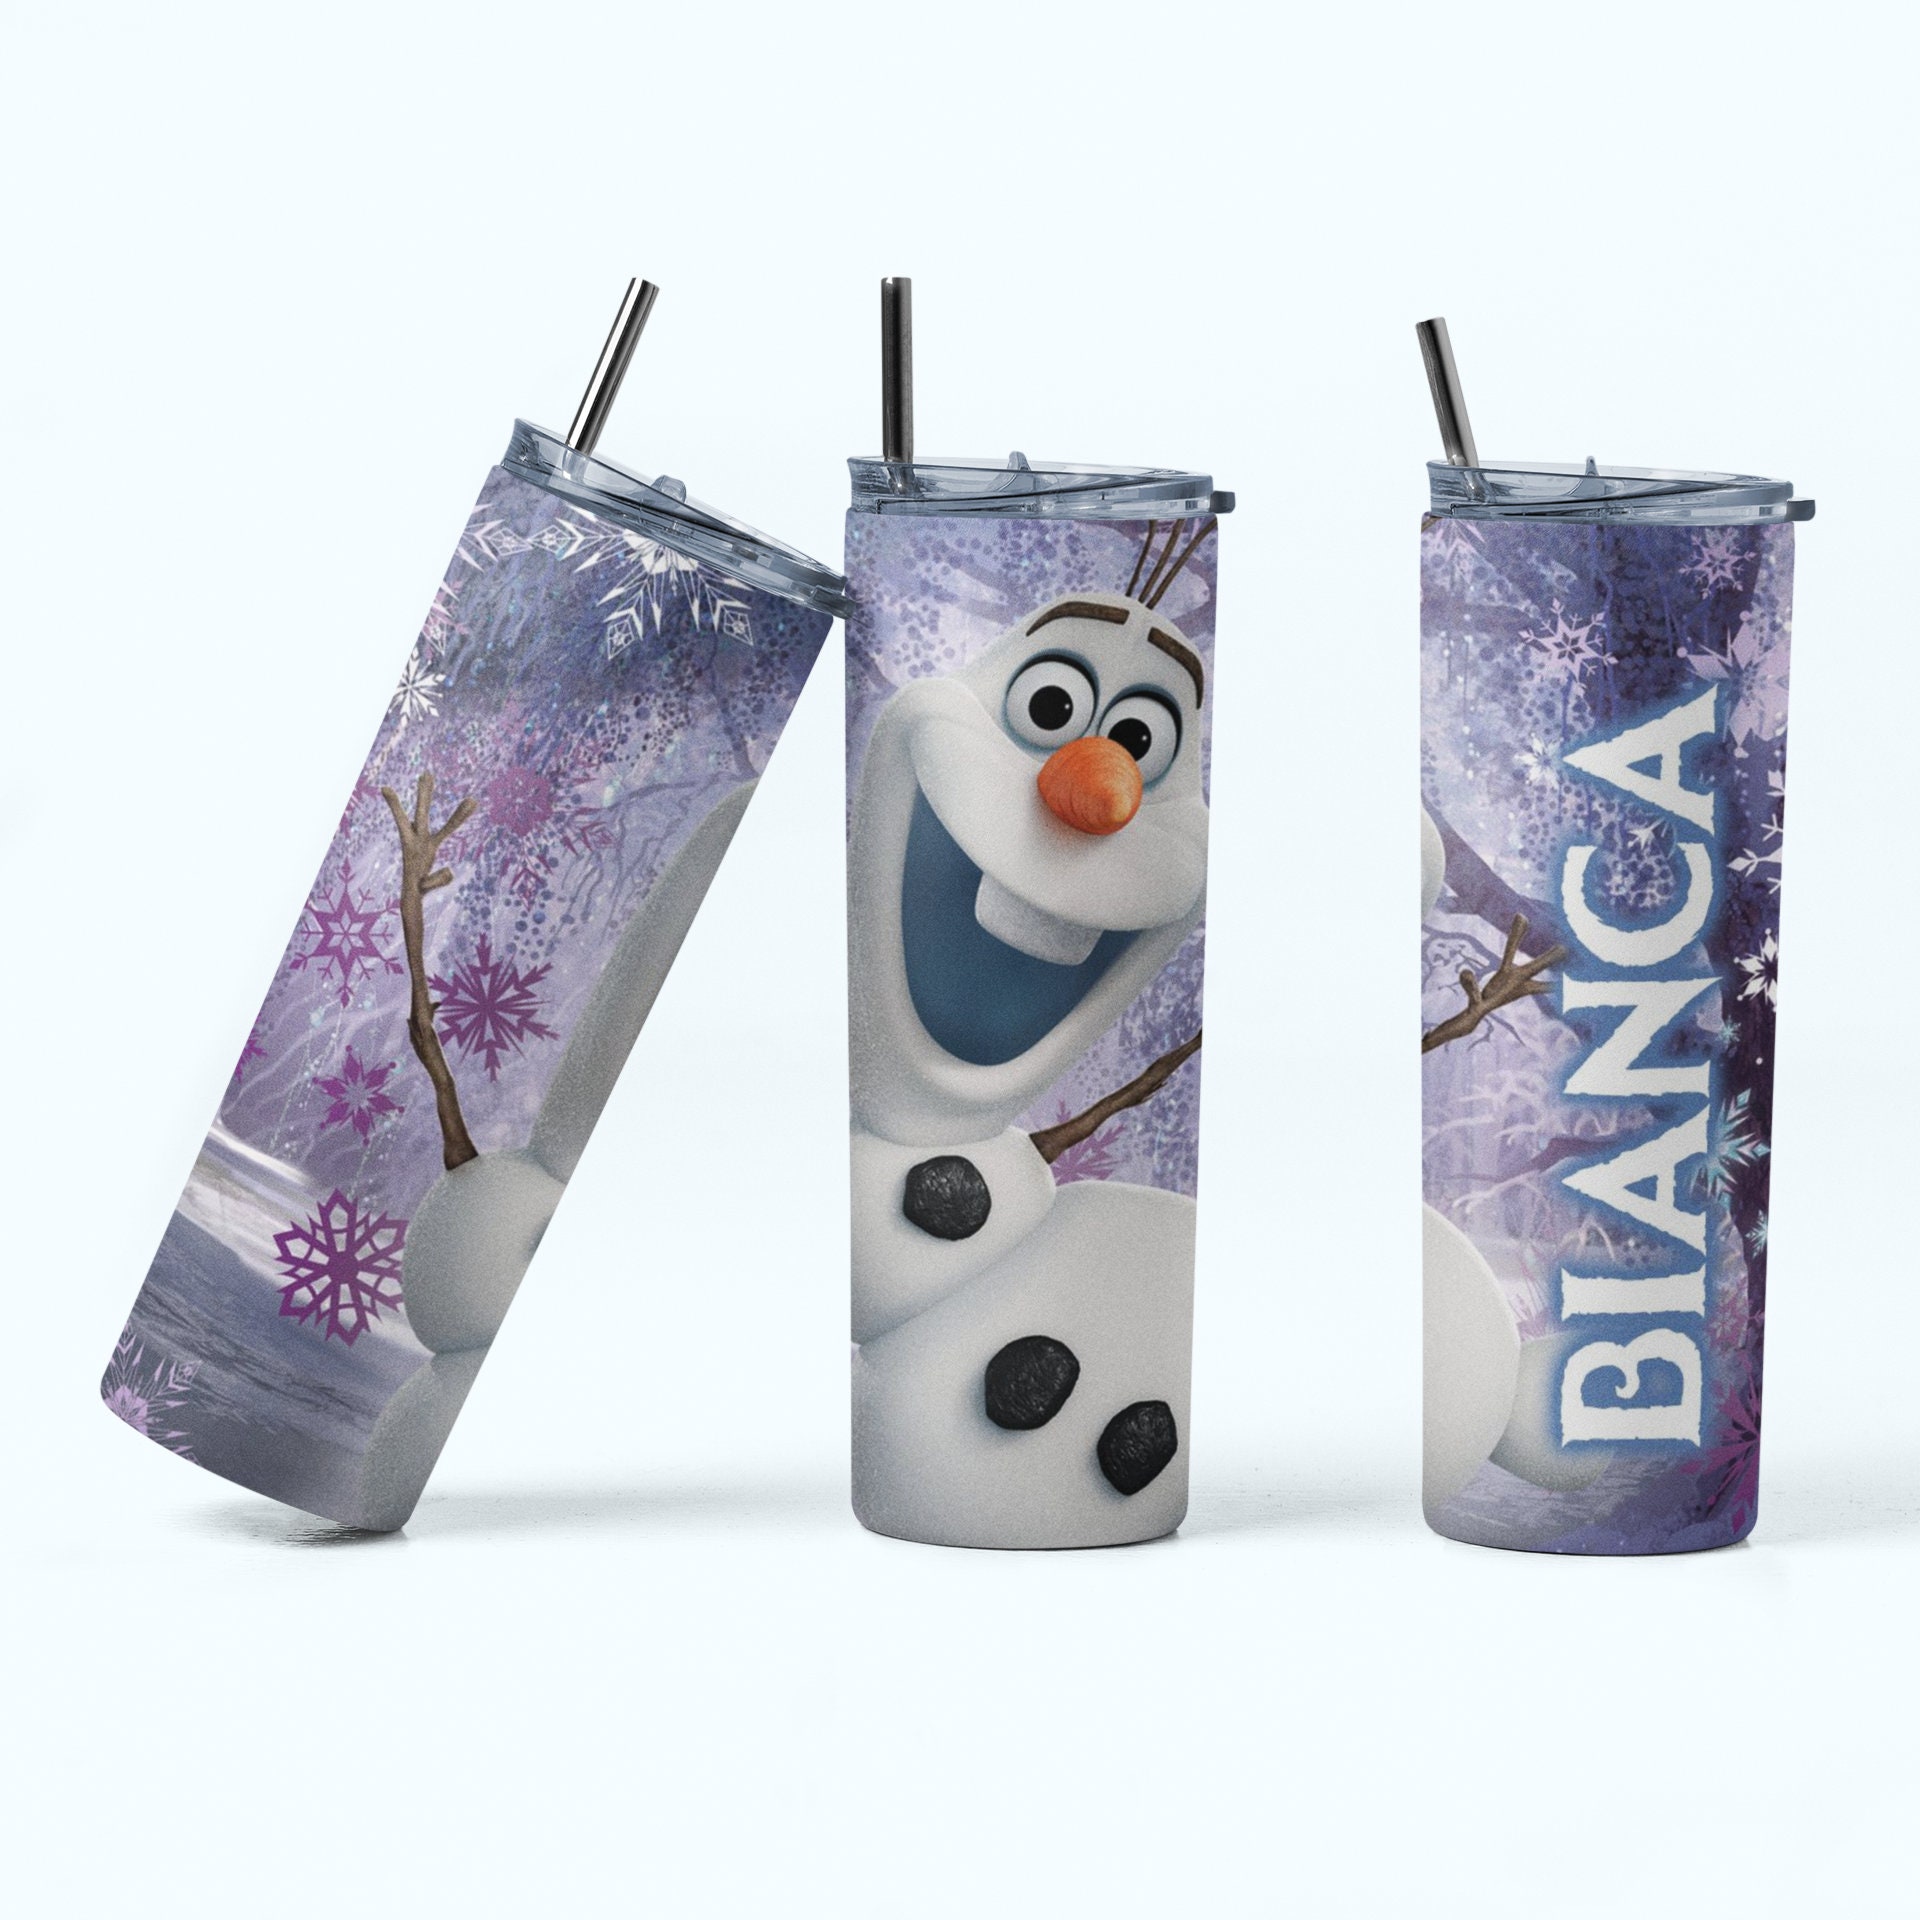 Olaf Glass Mug by Arribas – Frozen – Large – Personalized